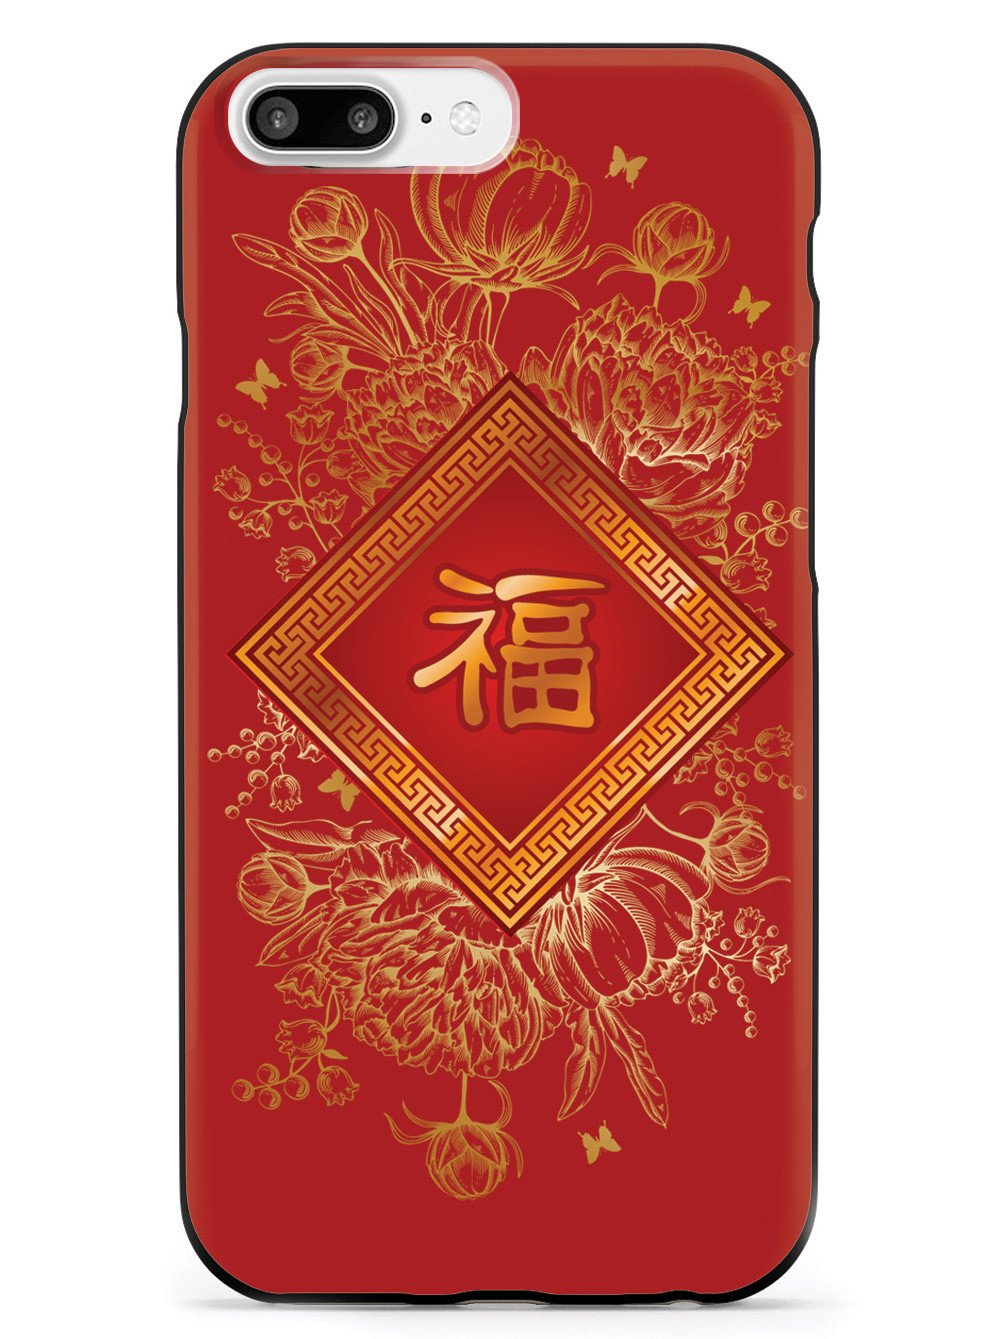 Chinese New Year - Red Envelope - Black Case